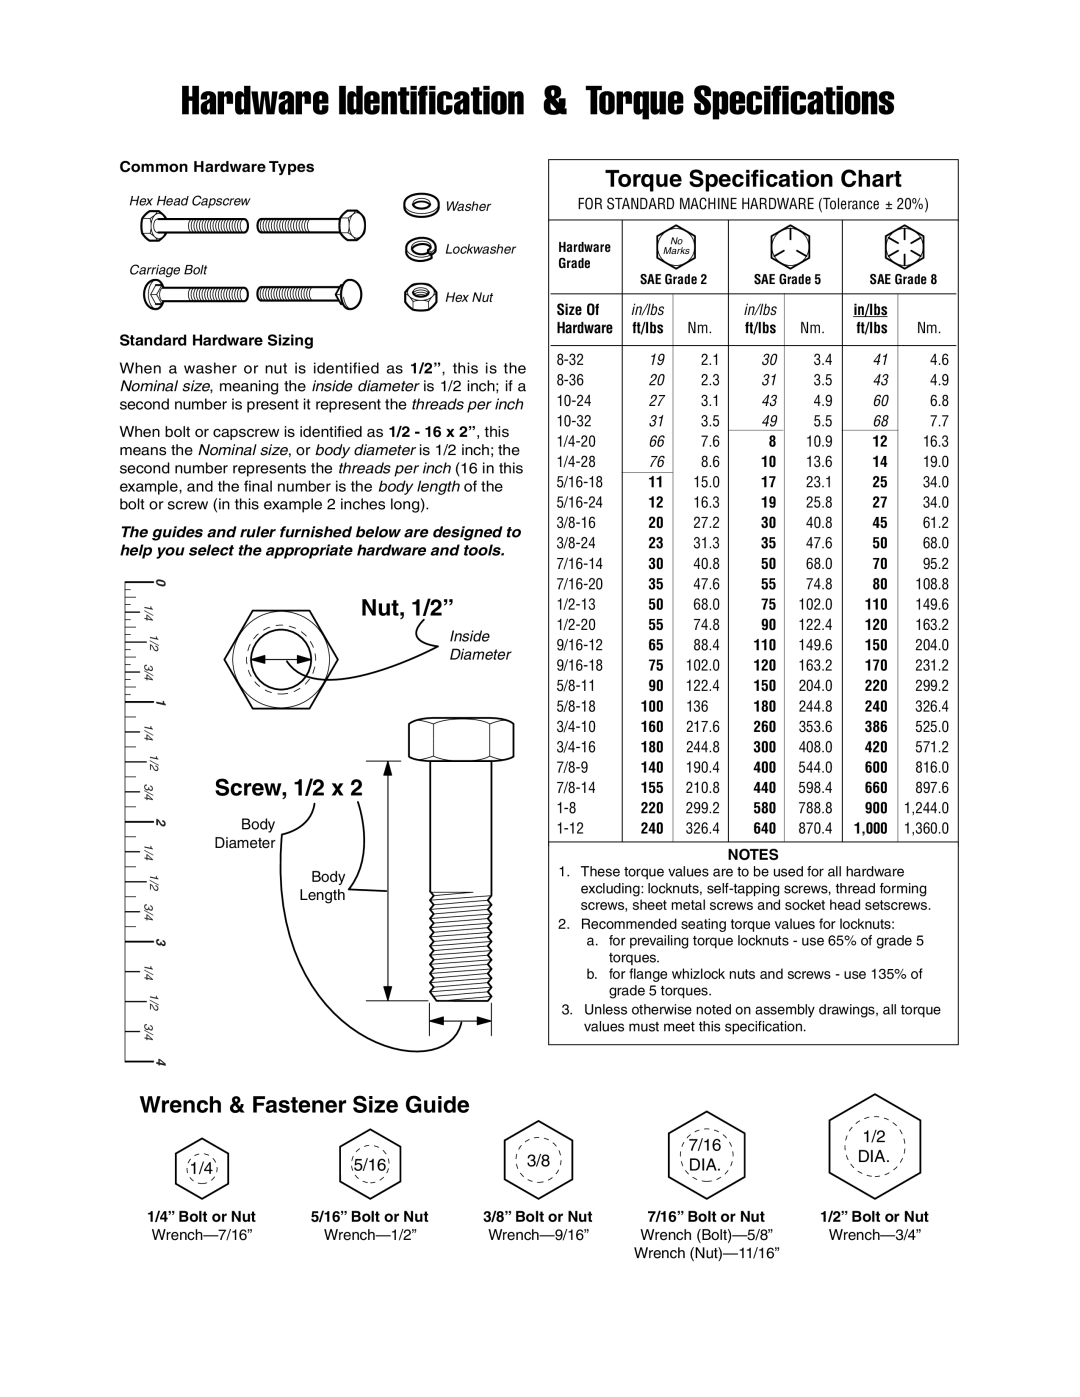 Simplicity 18HP Wrench & Fastener Size Guide, Hardware Identification & Torque Specifications, Torque Specification Chart 